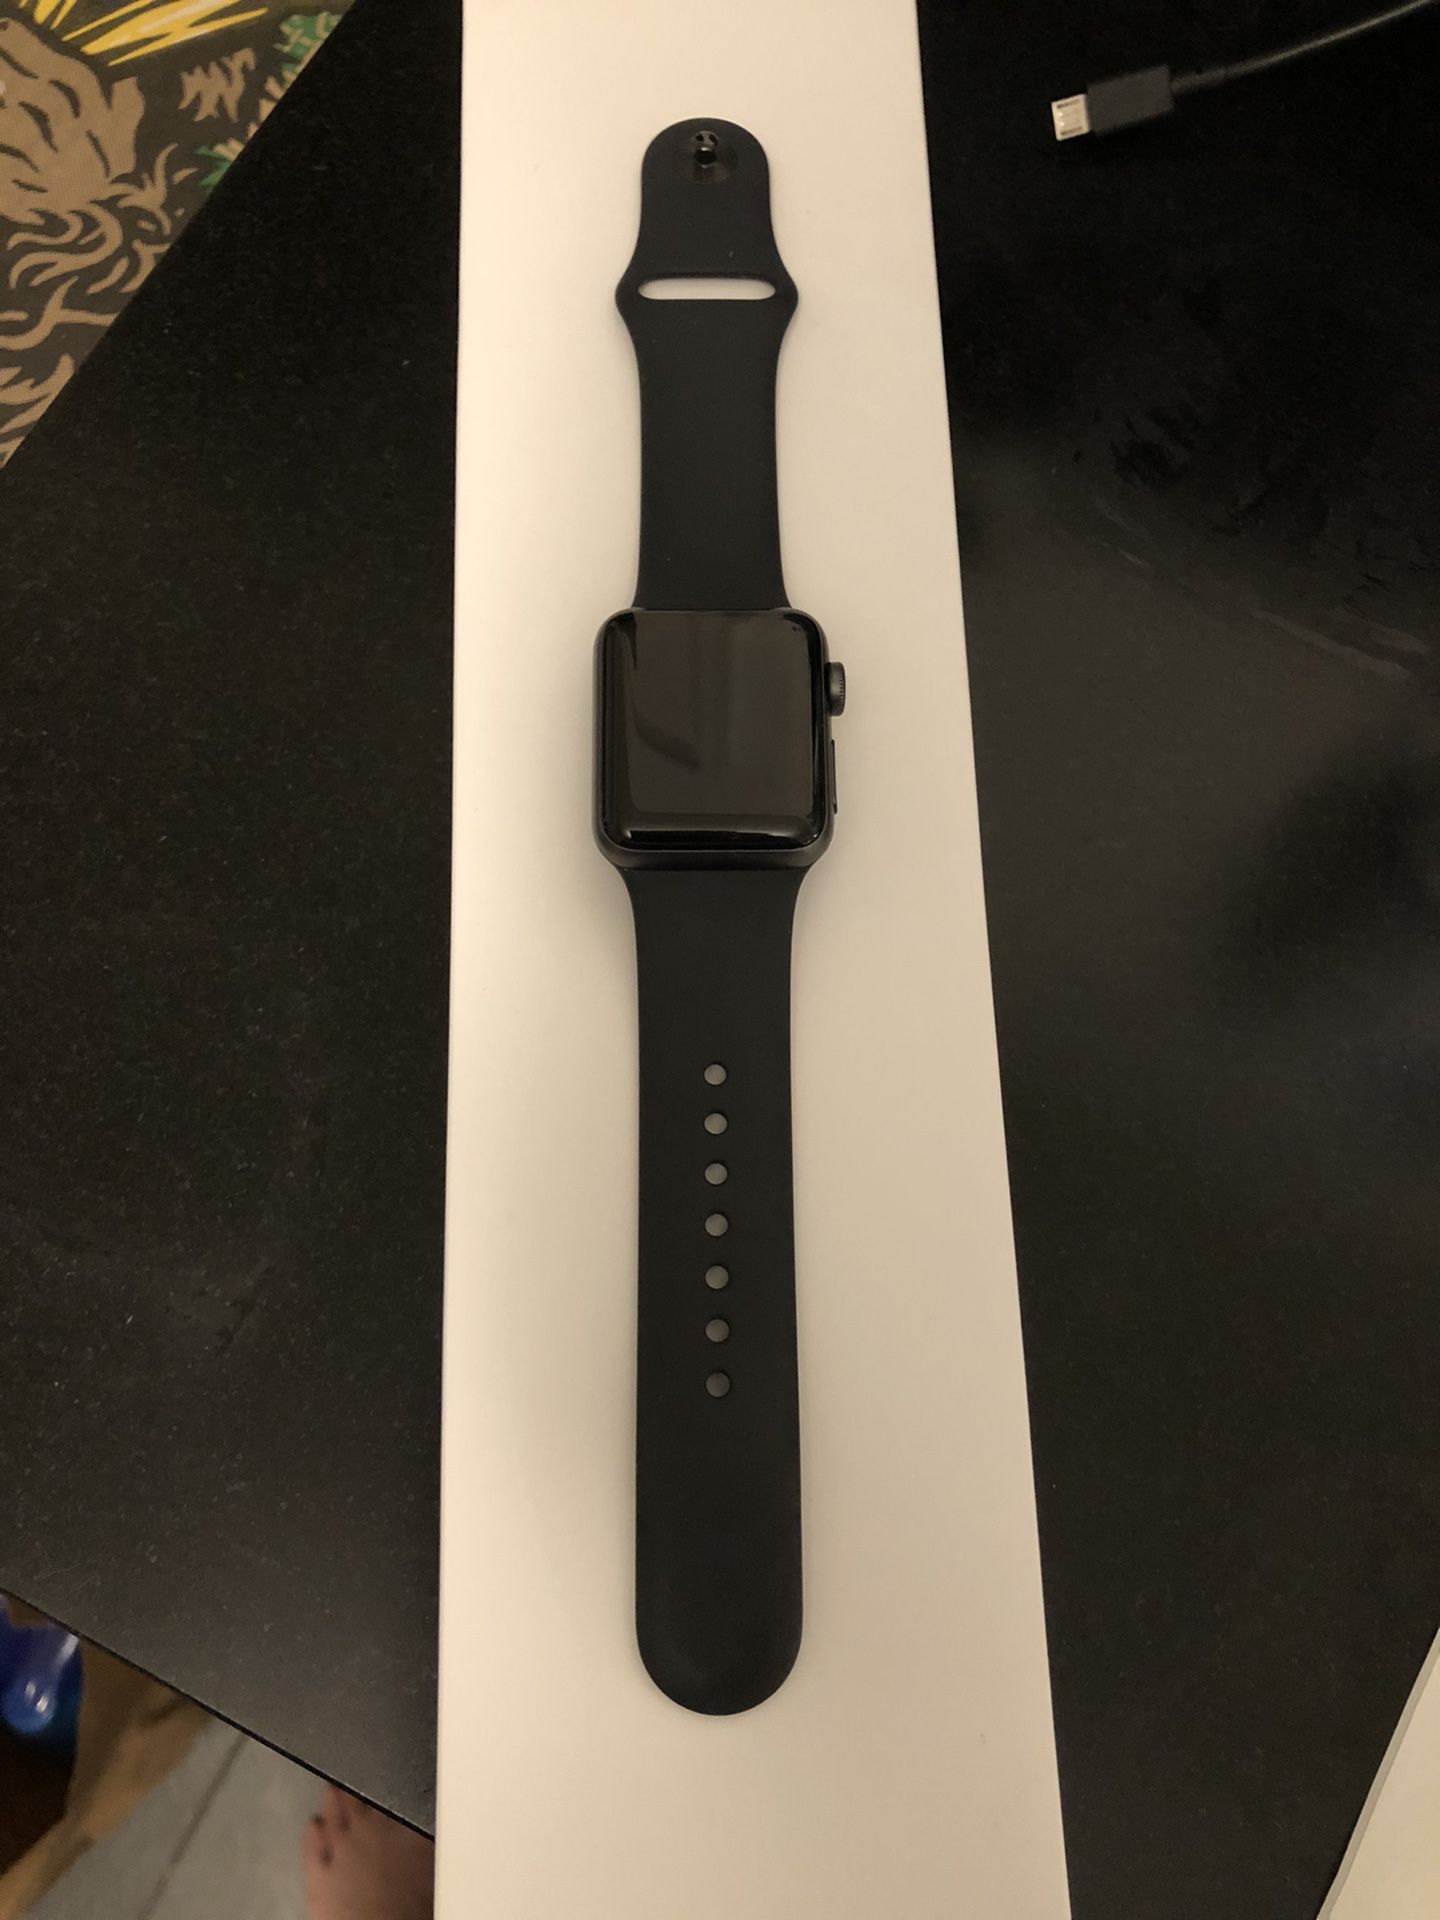 Apple Watch 3 - Mint condition